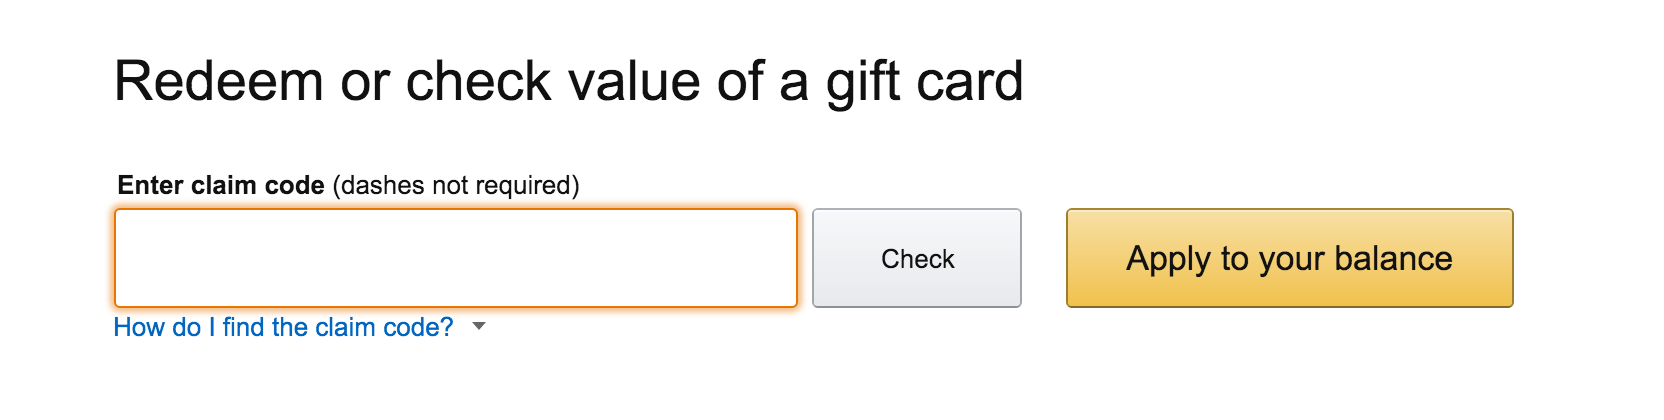 [DEAD] How To Check the Balance of an Amazon Gift Card - Doctor Of Credit